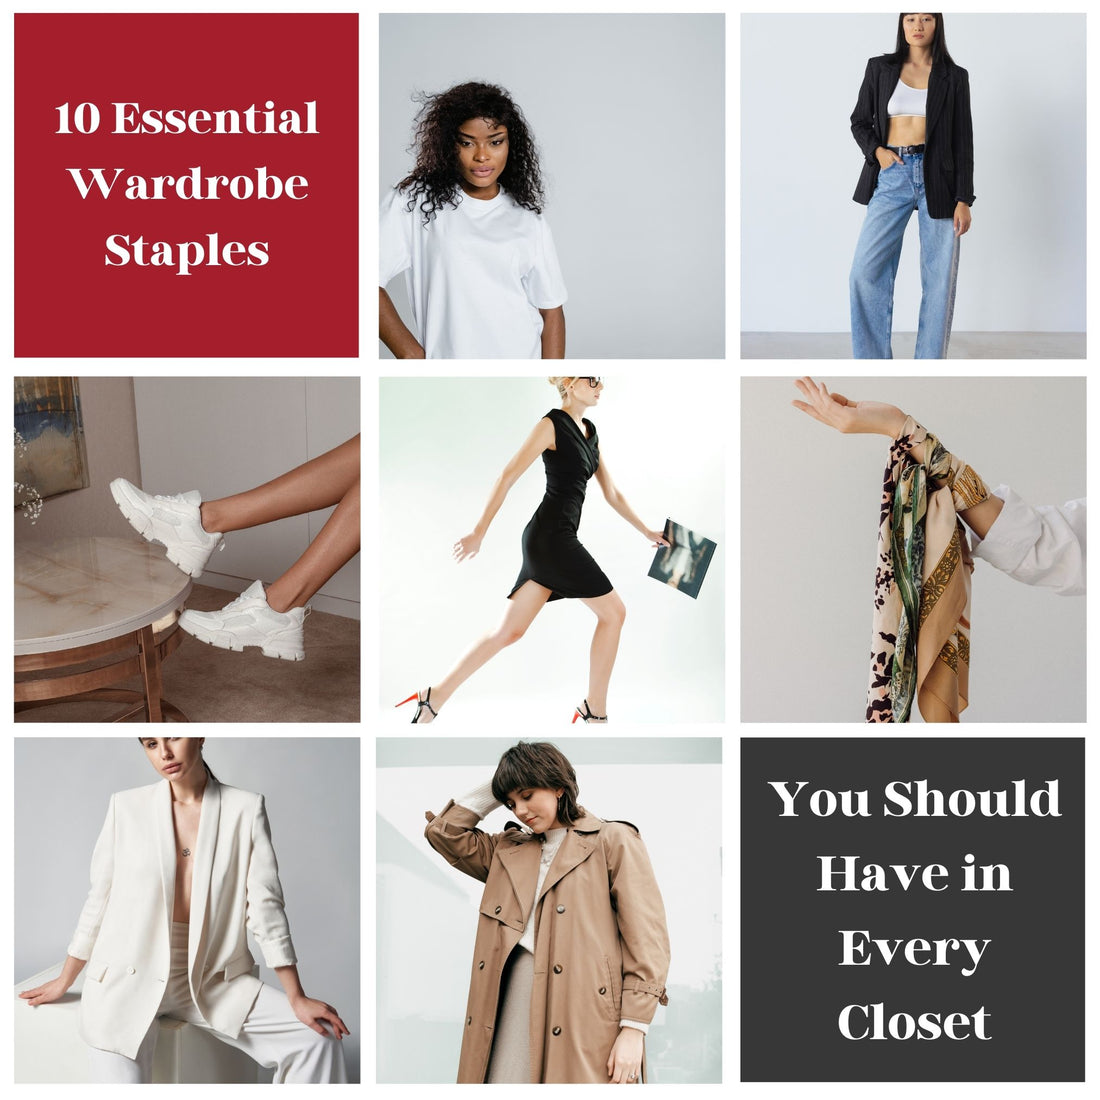 10 Essential Wardrobe Staples You Should Have in Every Closet